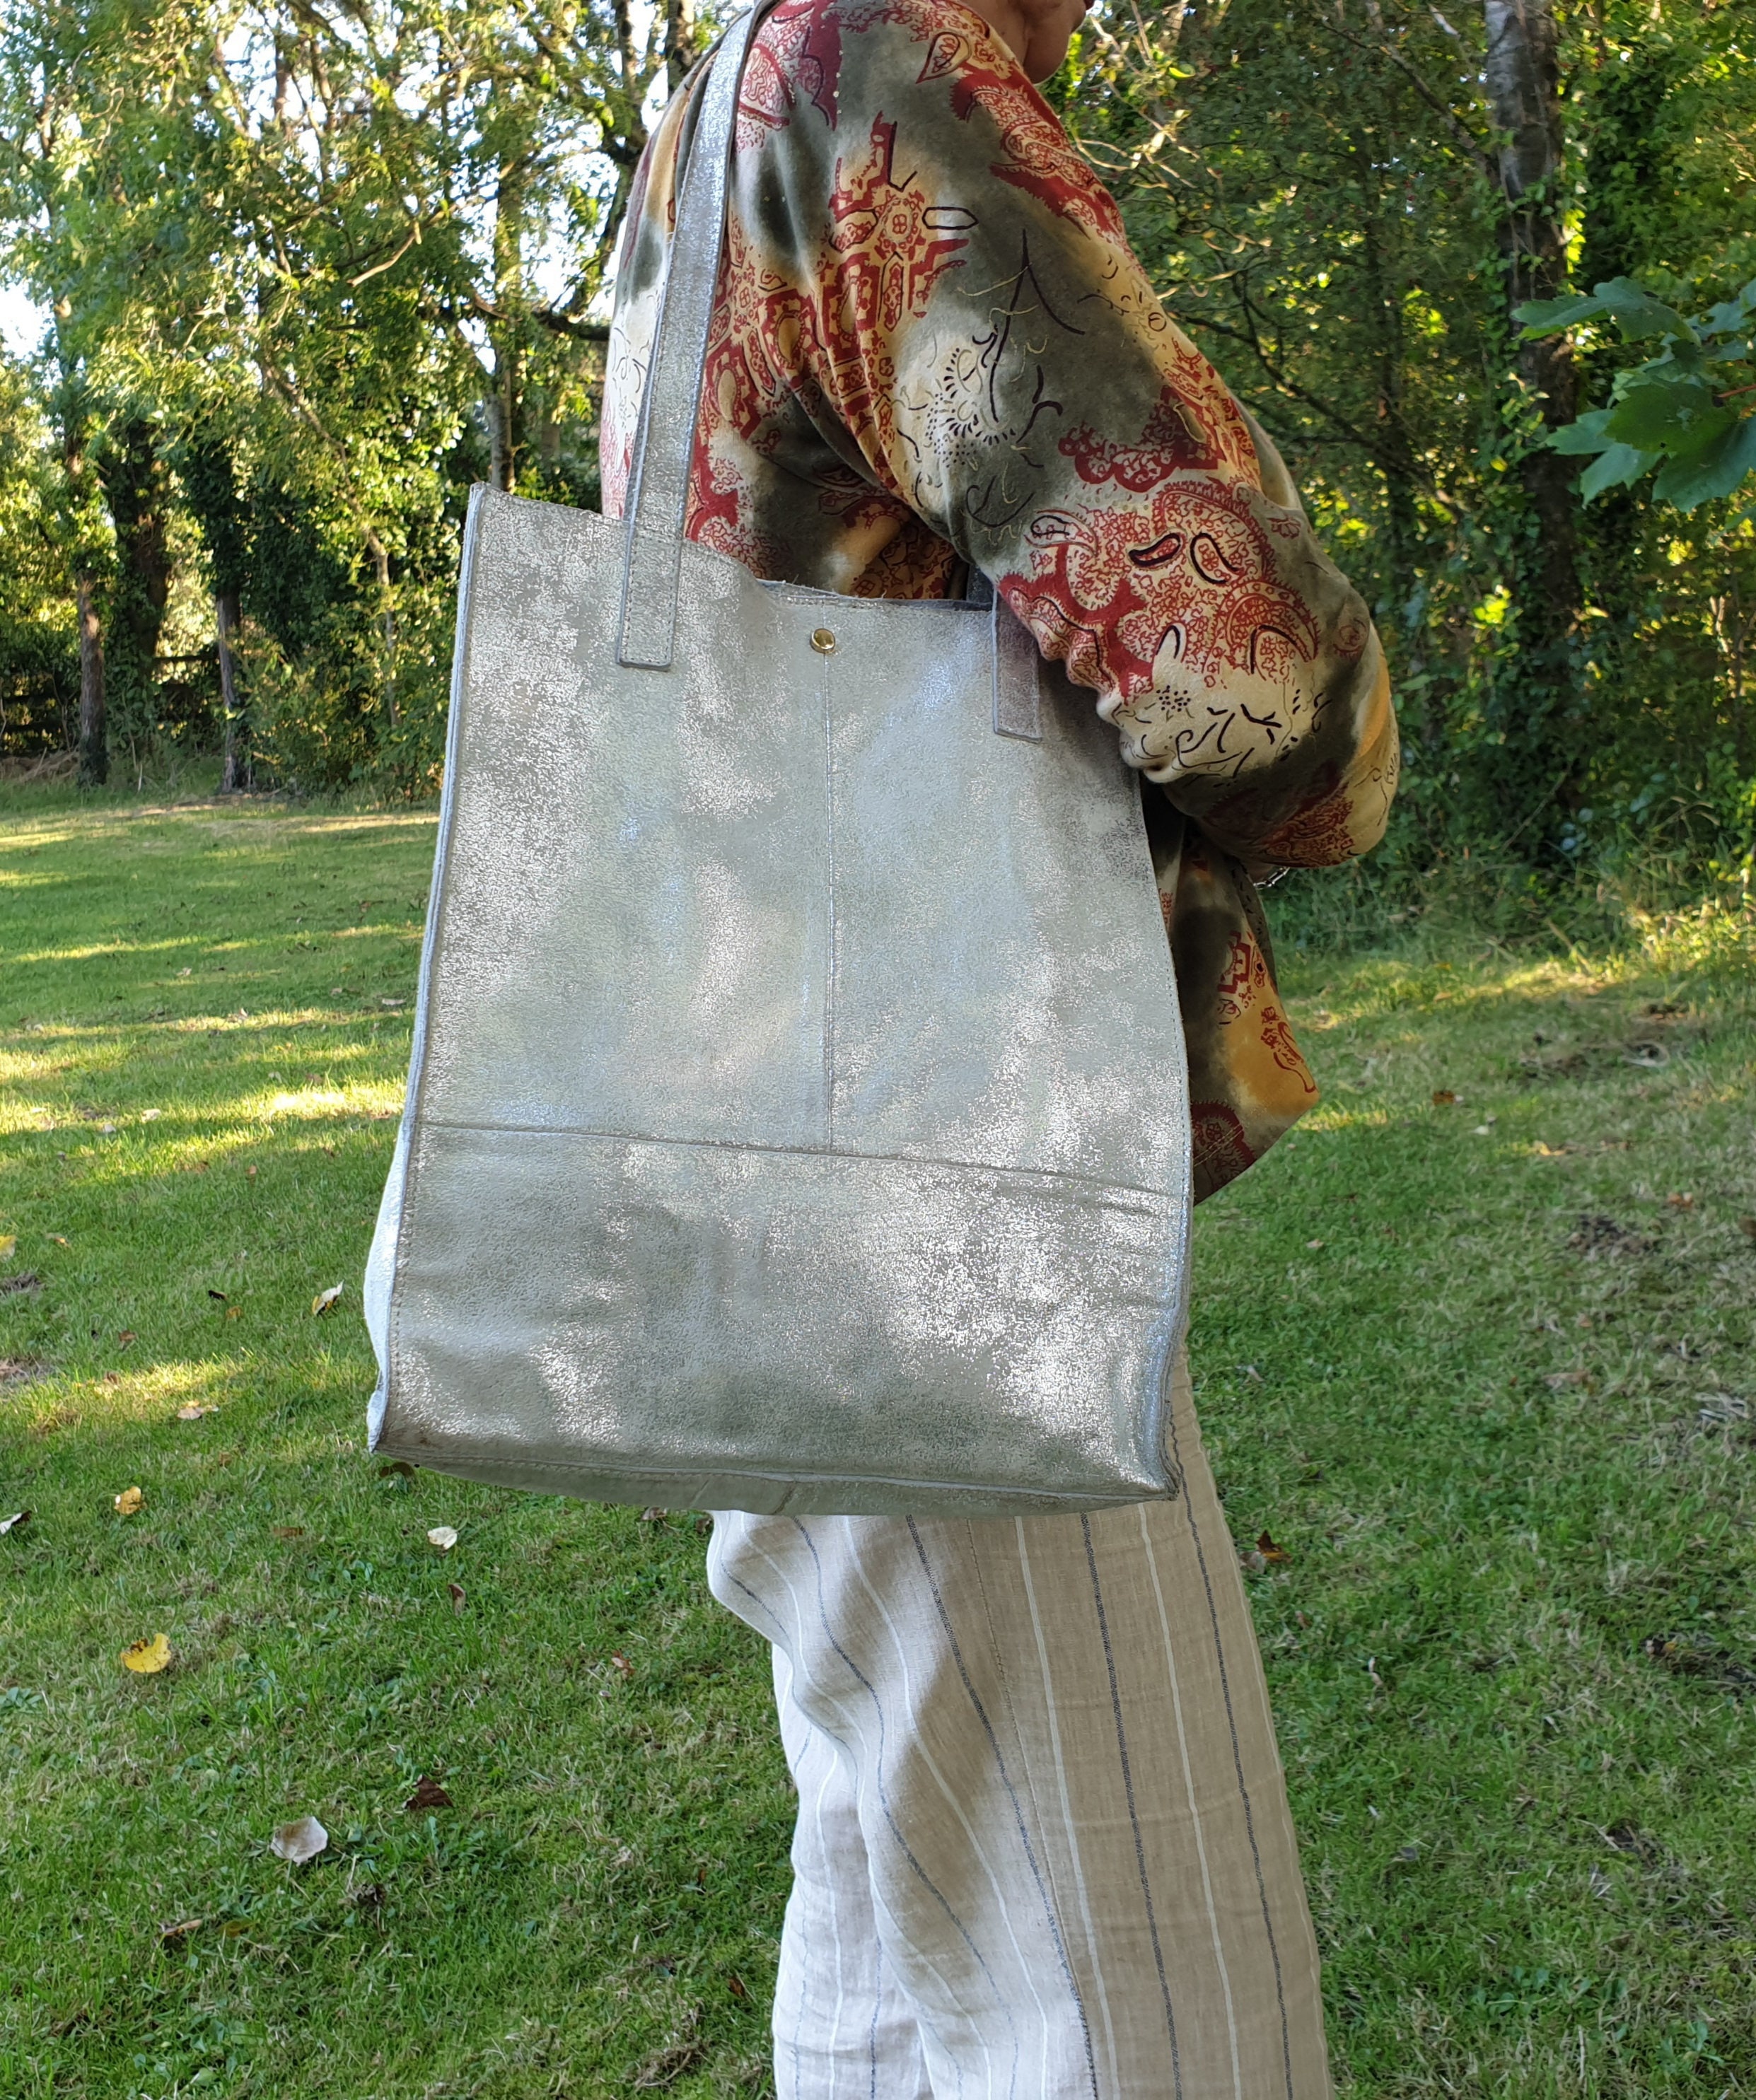 Silver Leather Tote Oversized Tote Bag Handmade With Metallic 